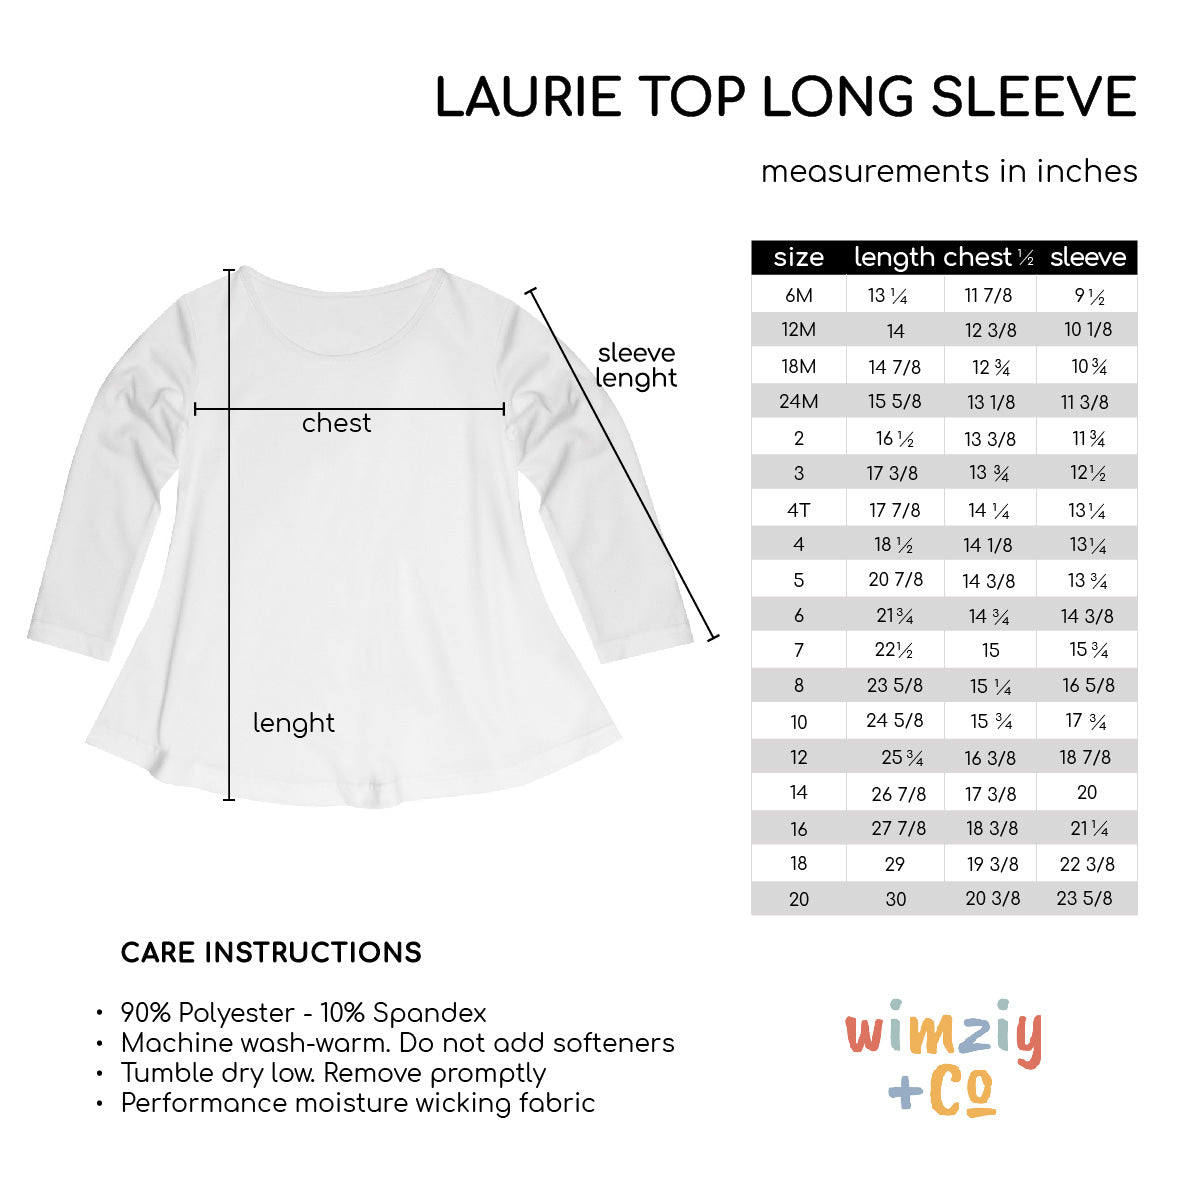 Is Your Grade Ready For This Navy Long Sleeve Laurie Top - Wimziy&Co.